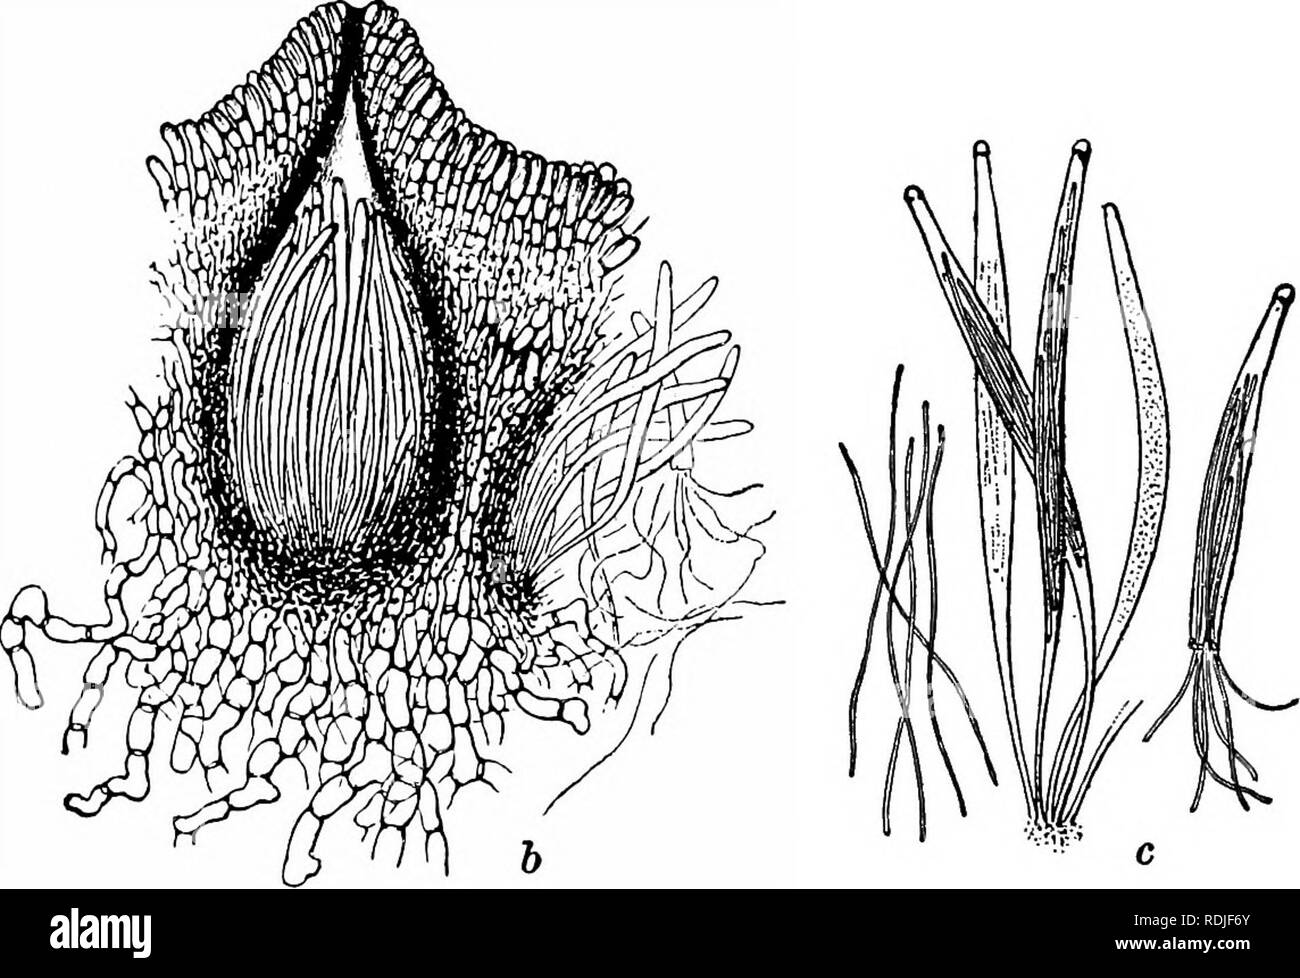 . Fungous diseases of plants : with chapters on physiology, culture methods and technique . Fungi in agriculture. Fig. 106. Claviceps purpurea: Section or Stroma and Enlarged Perithecium ; also Asci and Spores. (After Tulasne) the head numerous perithecia are formed near the periphery. So far as is known, a perithecium is developed in two successive stages : (1) By the repeated division of a few differentiated cells below the surface there results an ellipsoidal pre-ascal tissue. (2) In the proximal or basal portion of this cellular body an hymenium. Please note that these images are extracted Stock Photo